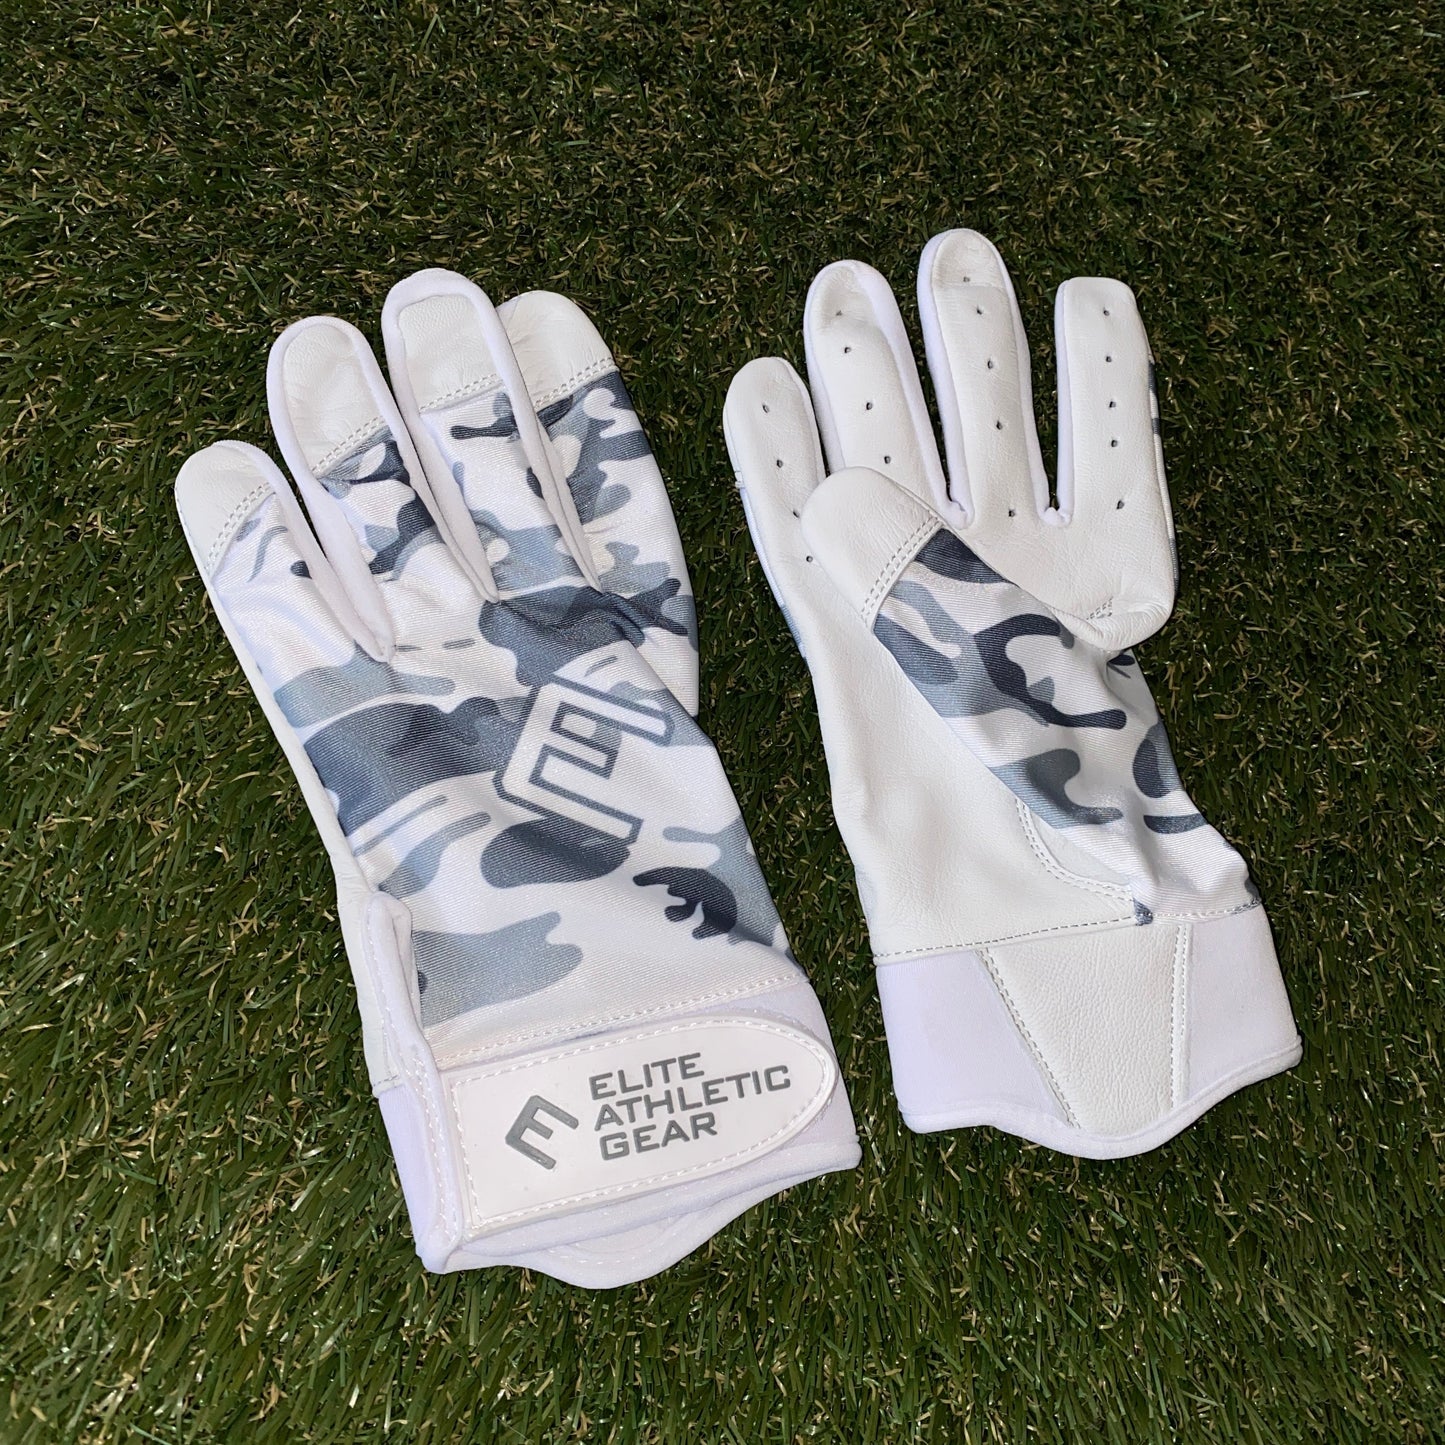 Snow Camo Batting Gloves - Southern Grace Creations